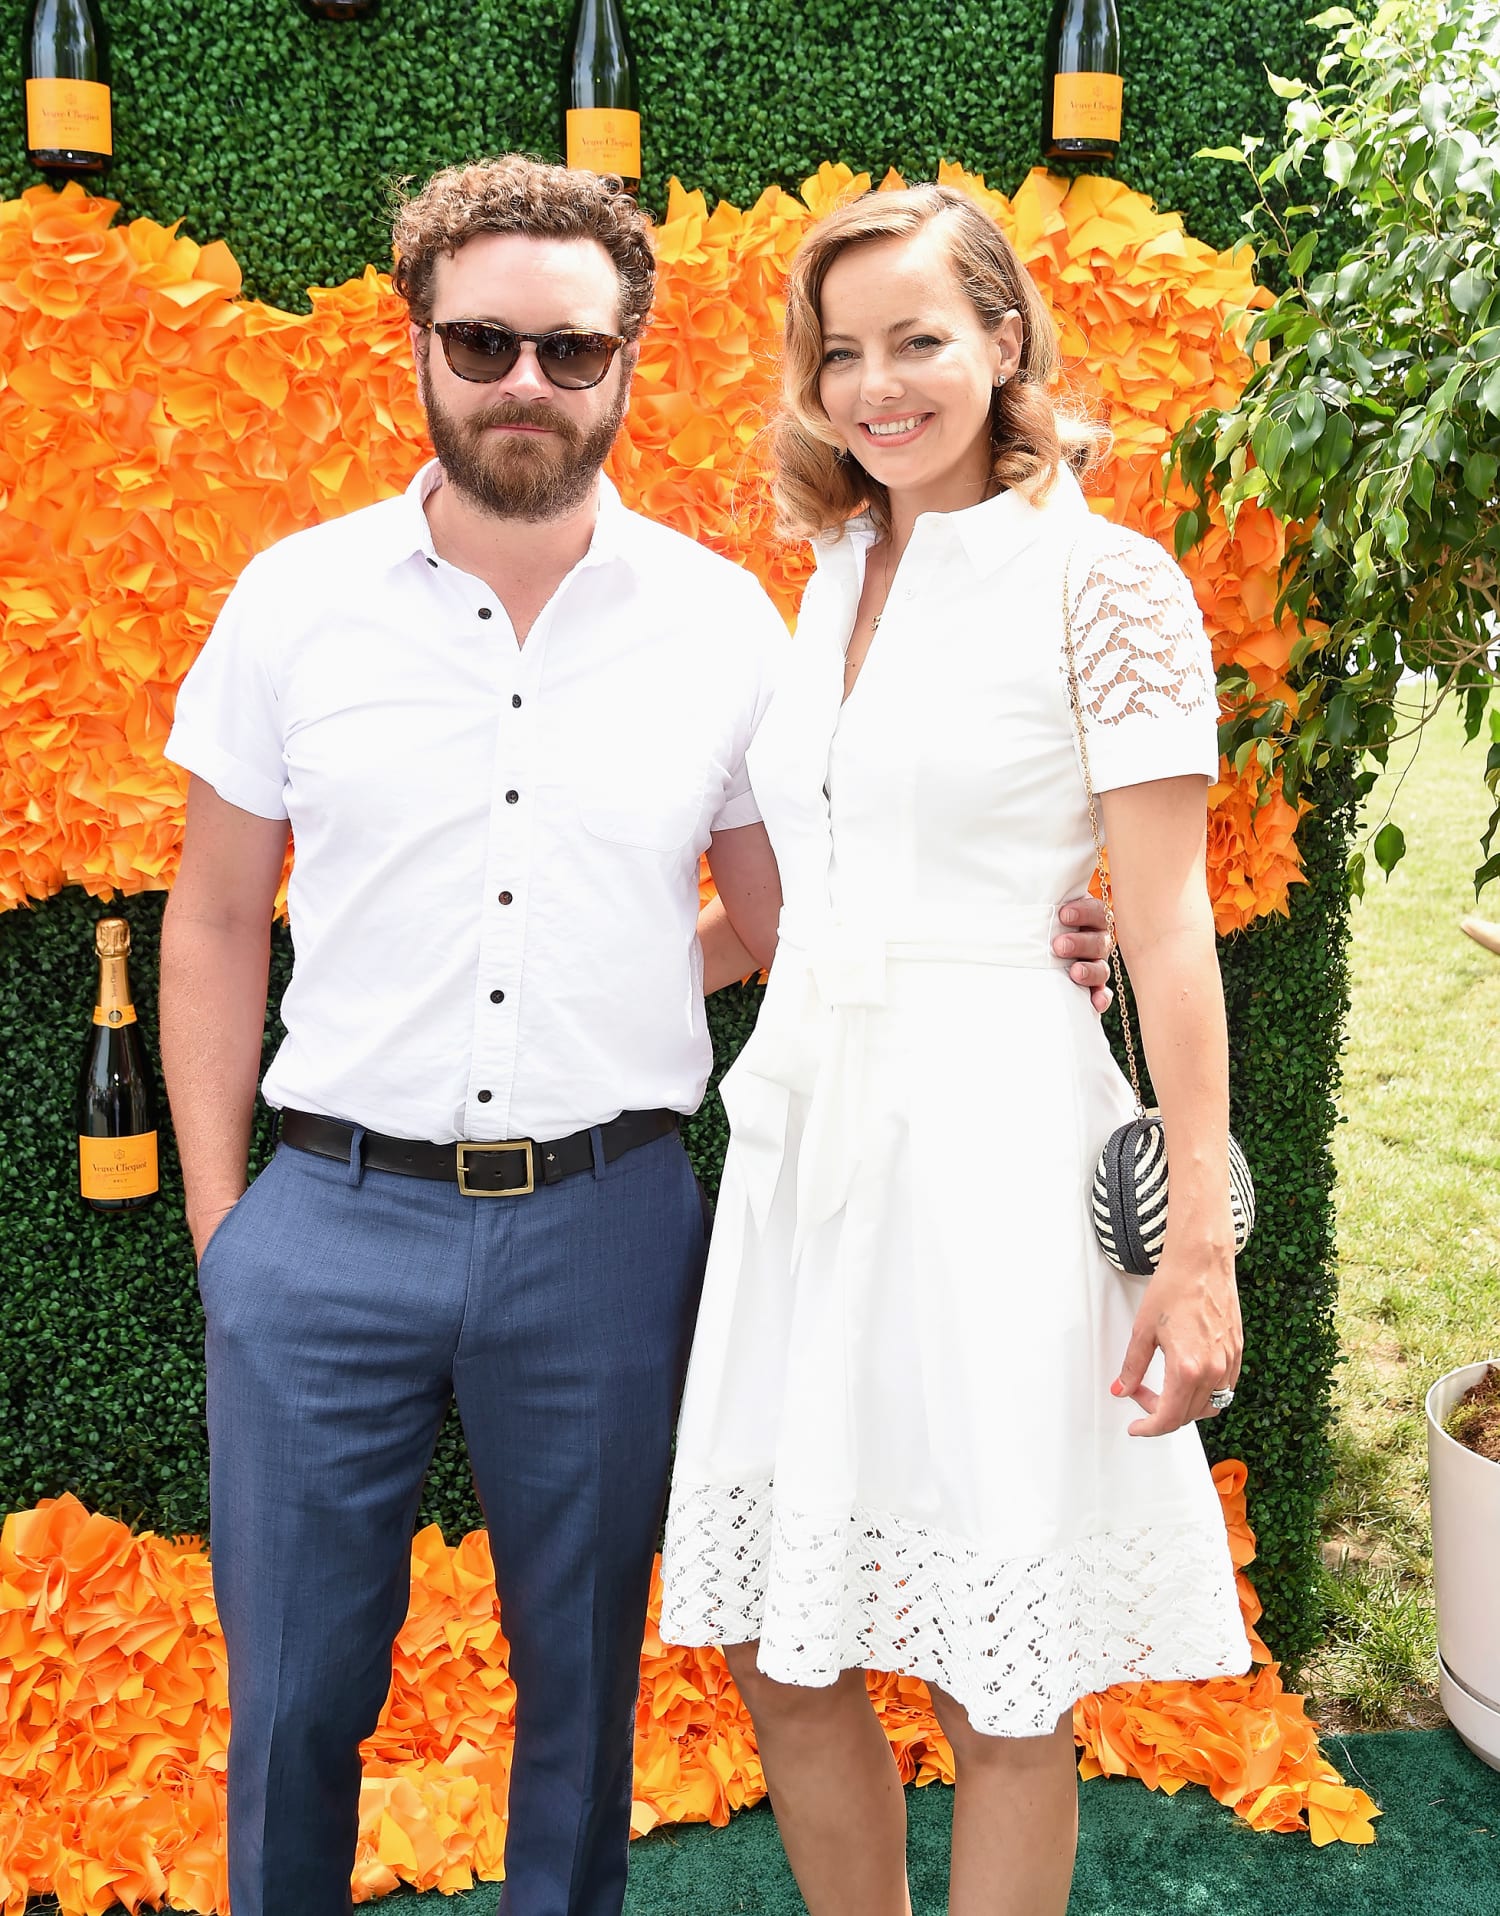 Who Is Bijou Phillips? About Her Life Before And After Danny Masterson